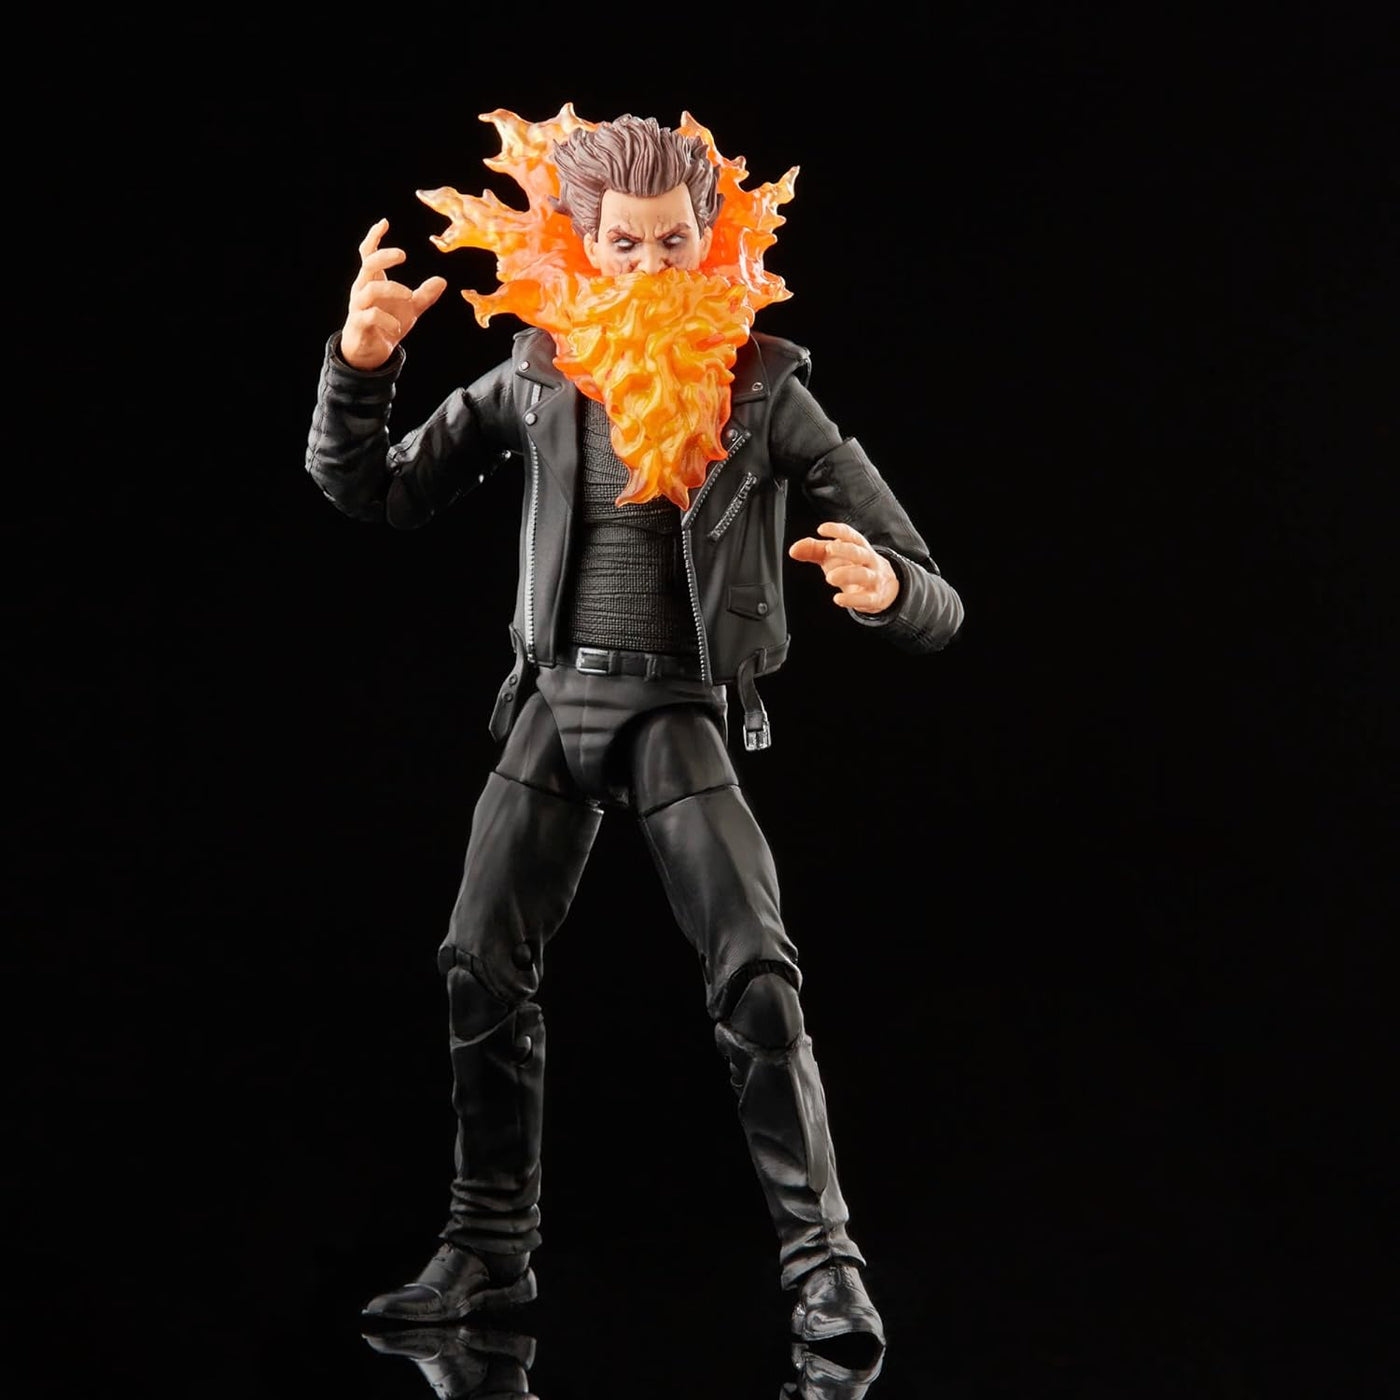 Marvel Legends Series Chamber Generation X Comics,X-Men Collectible 6-Inch Action Figure